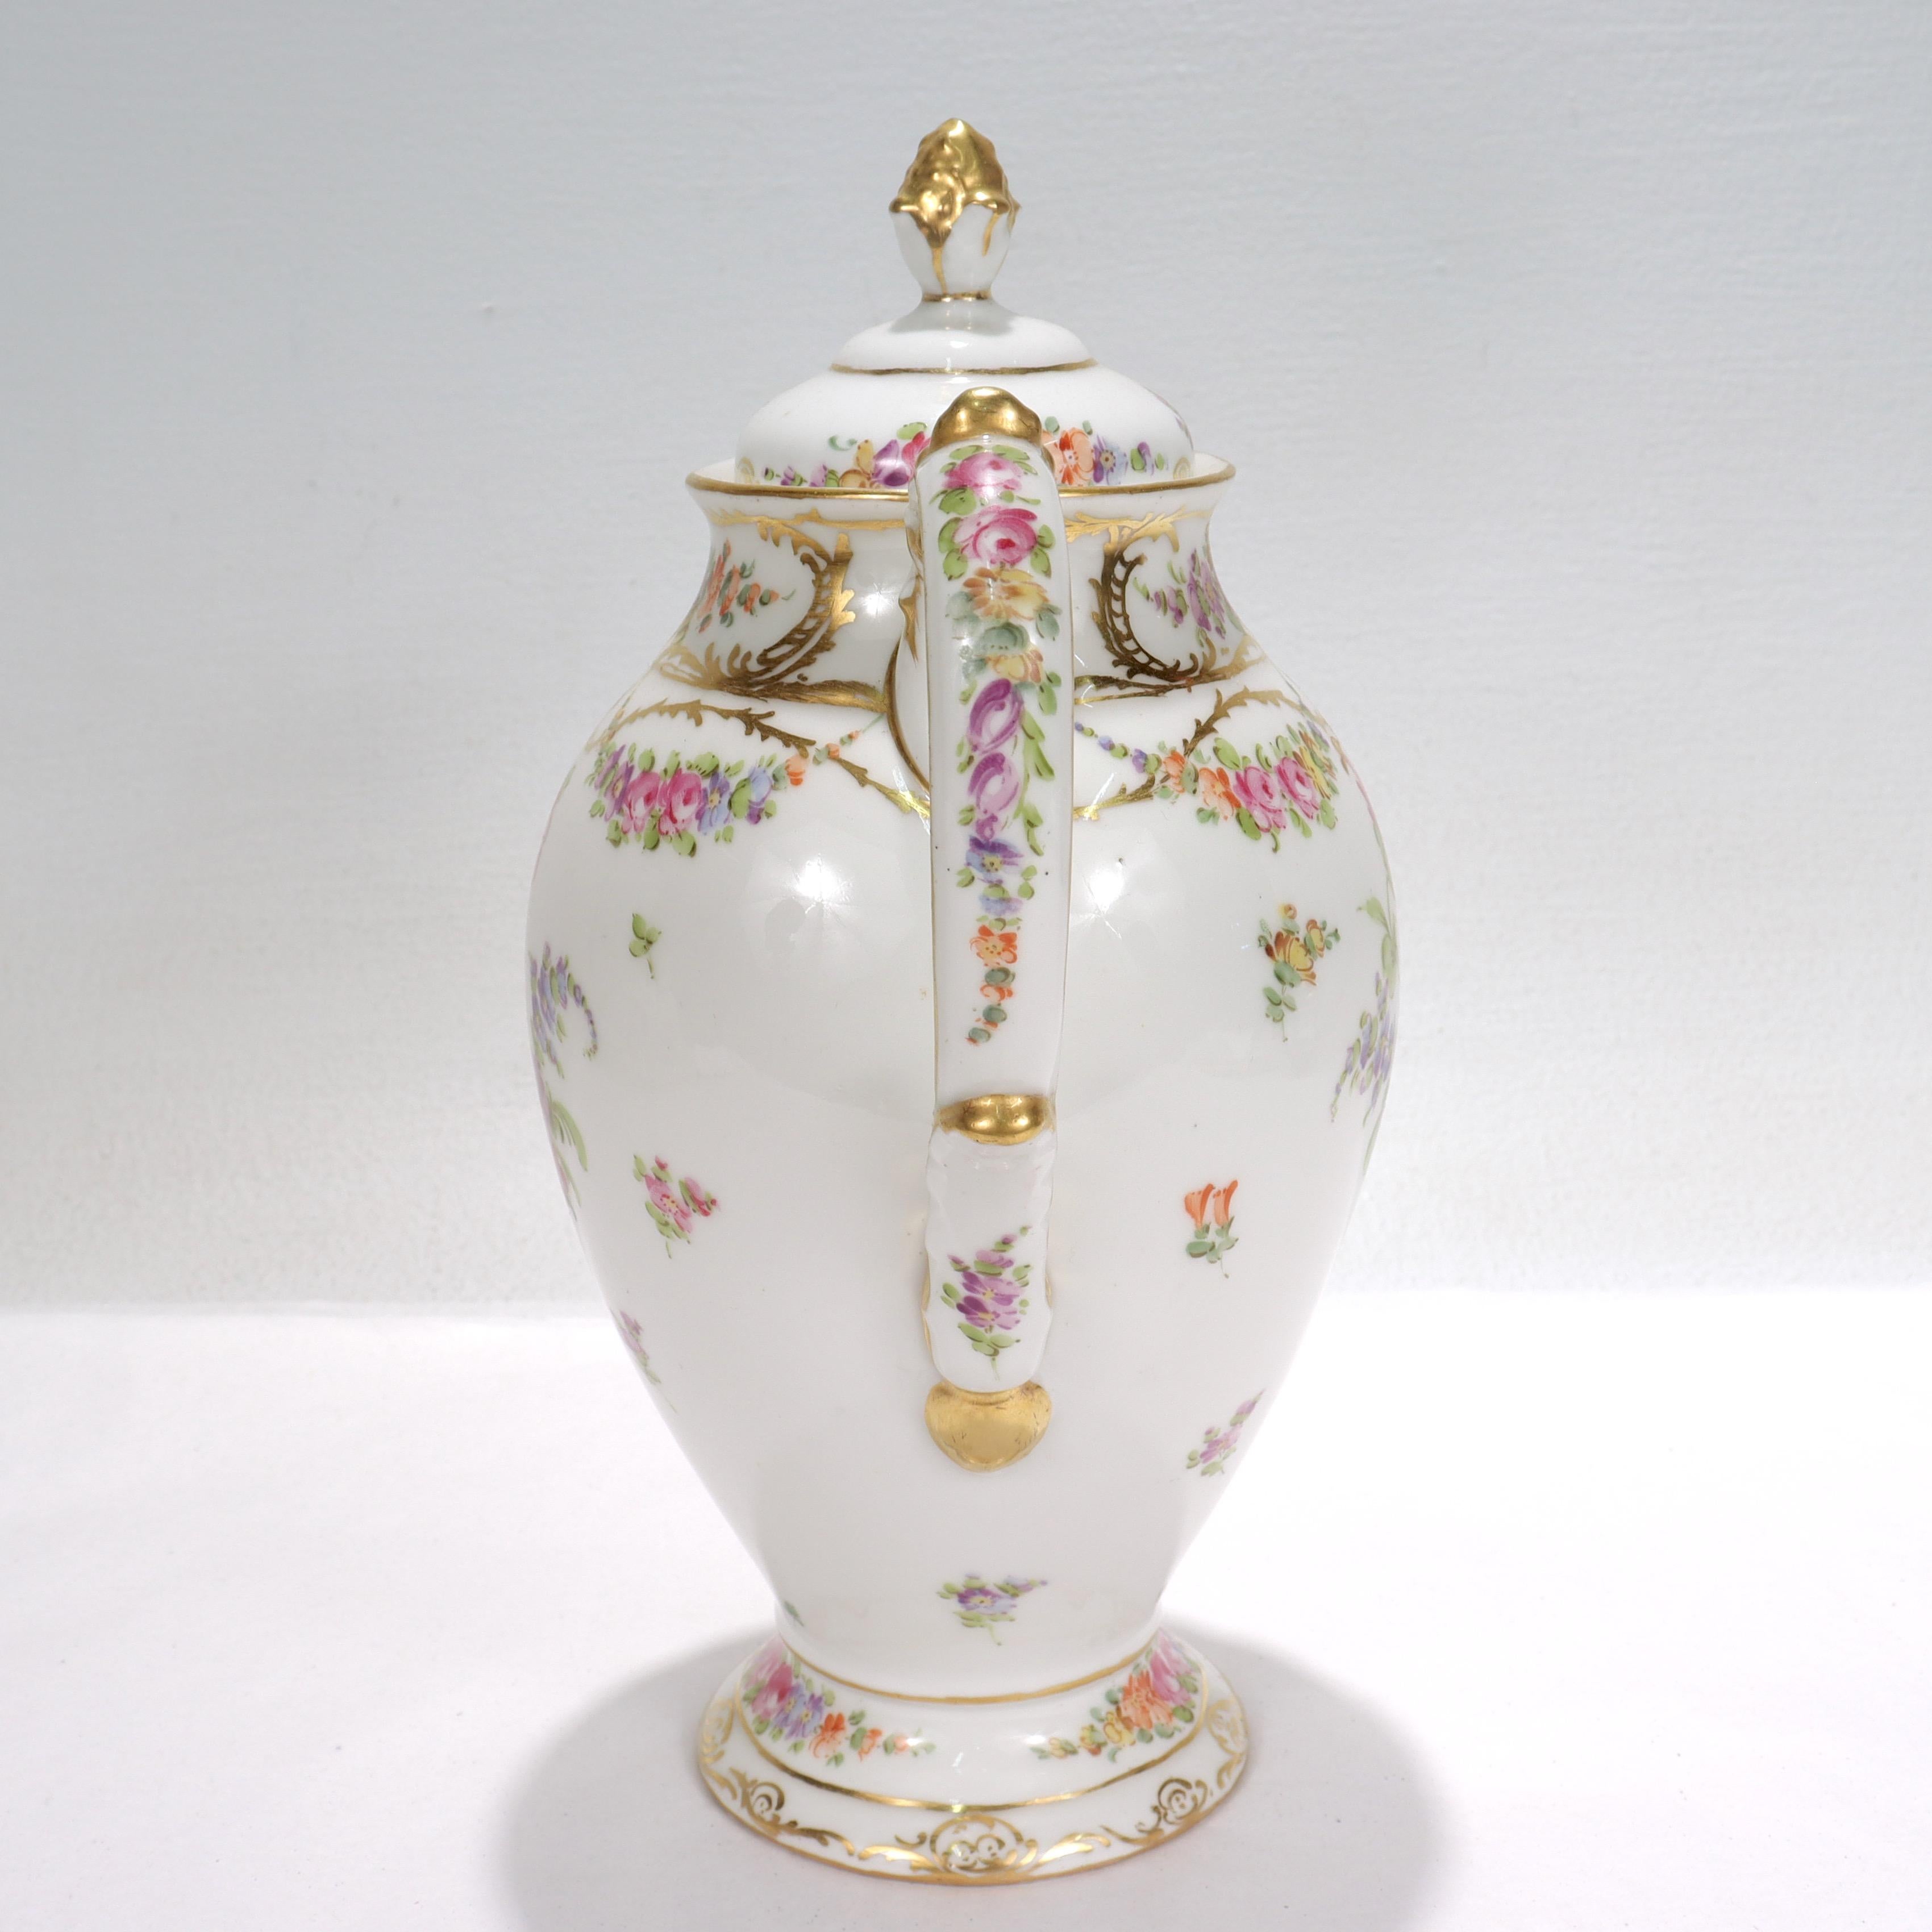 French Antique Limoges Dresden Porcelain Chocolate Pot with Handpainted Flowers